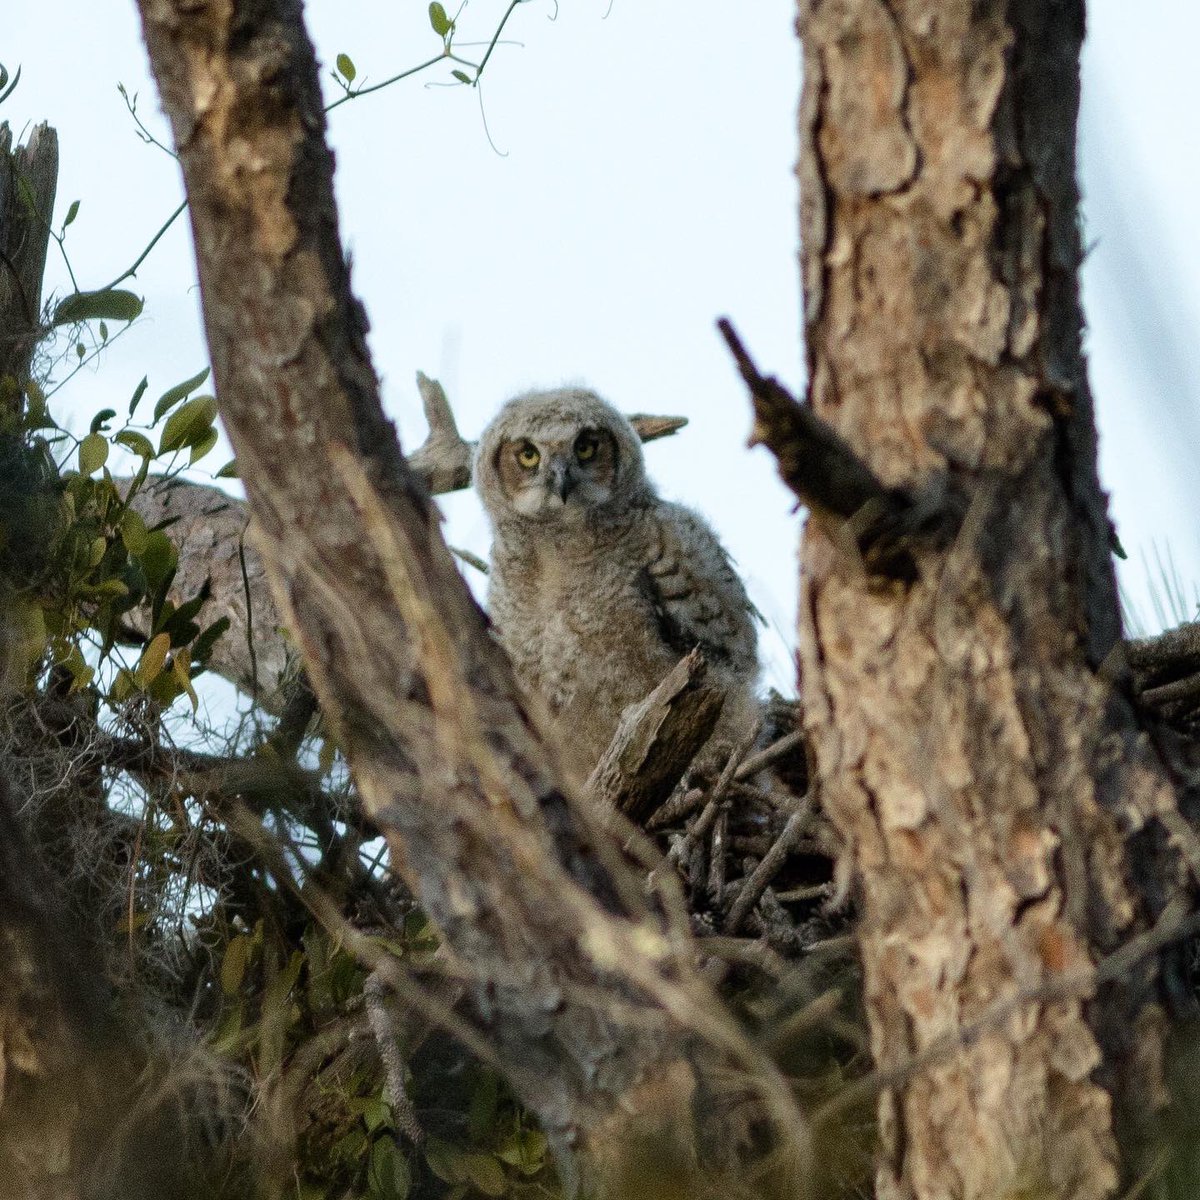 Baby Great Horned #owl sitting on the nest. Taken in late February on the west coast of #Florida. #owls #bird #lovefl #roamflorida #wildlife #nature #floridalife #wildlifephotography #birdphotography